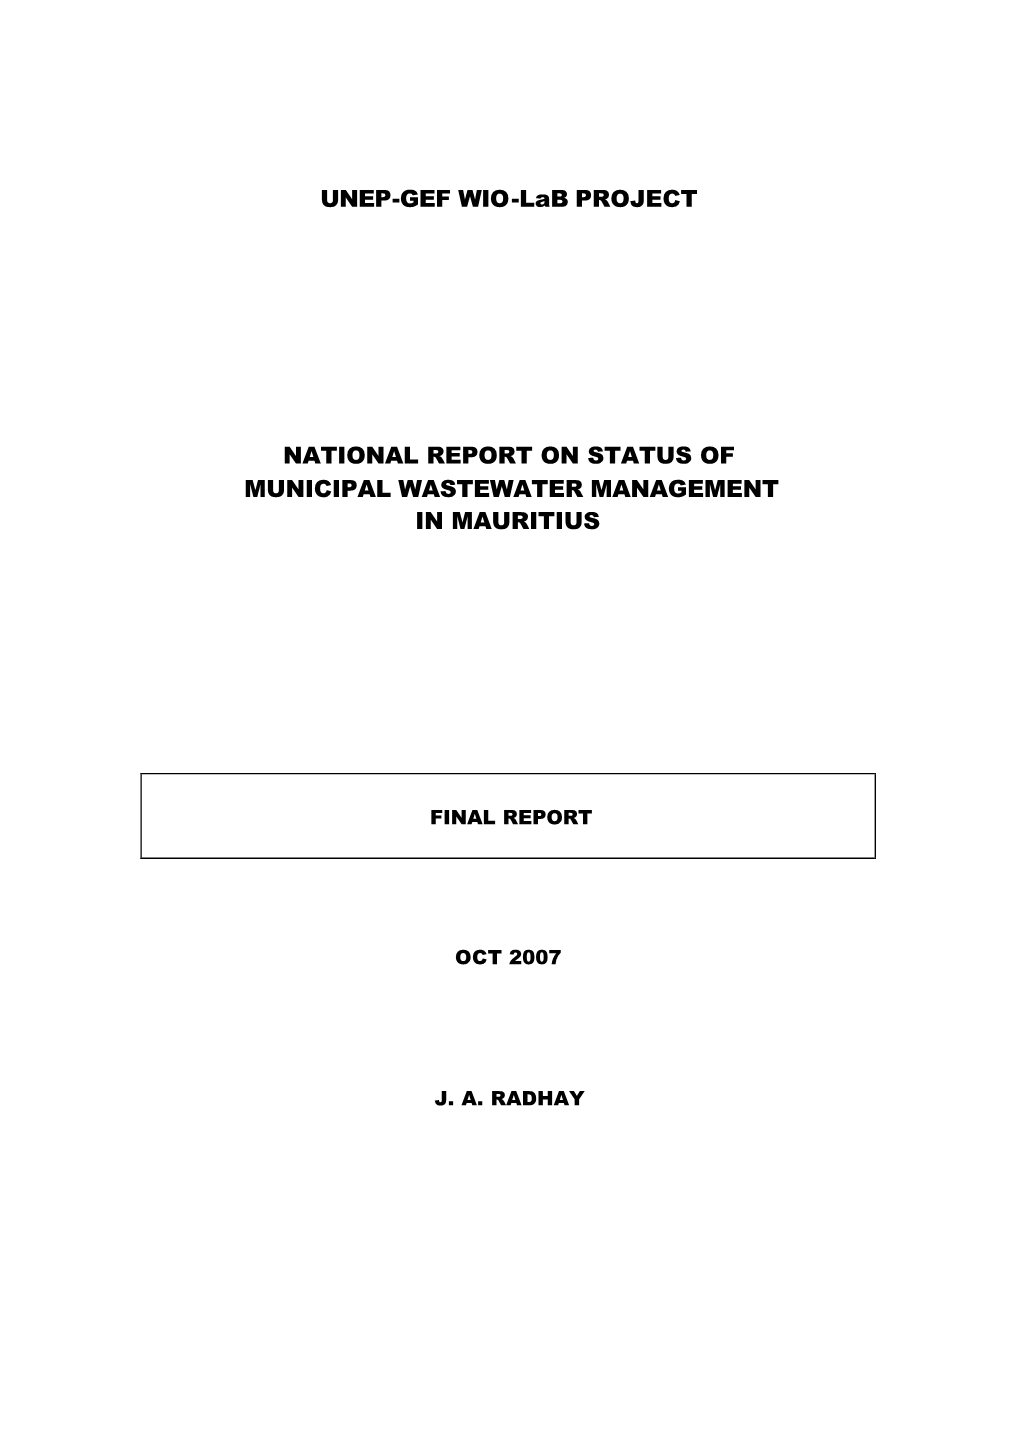 UNEP-GEF WIO-Lab PROJECT NATIONAL REPORT on STATUS of MUNICIPAL WASTEWATER MANAGEMENT in MAURITIUS